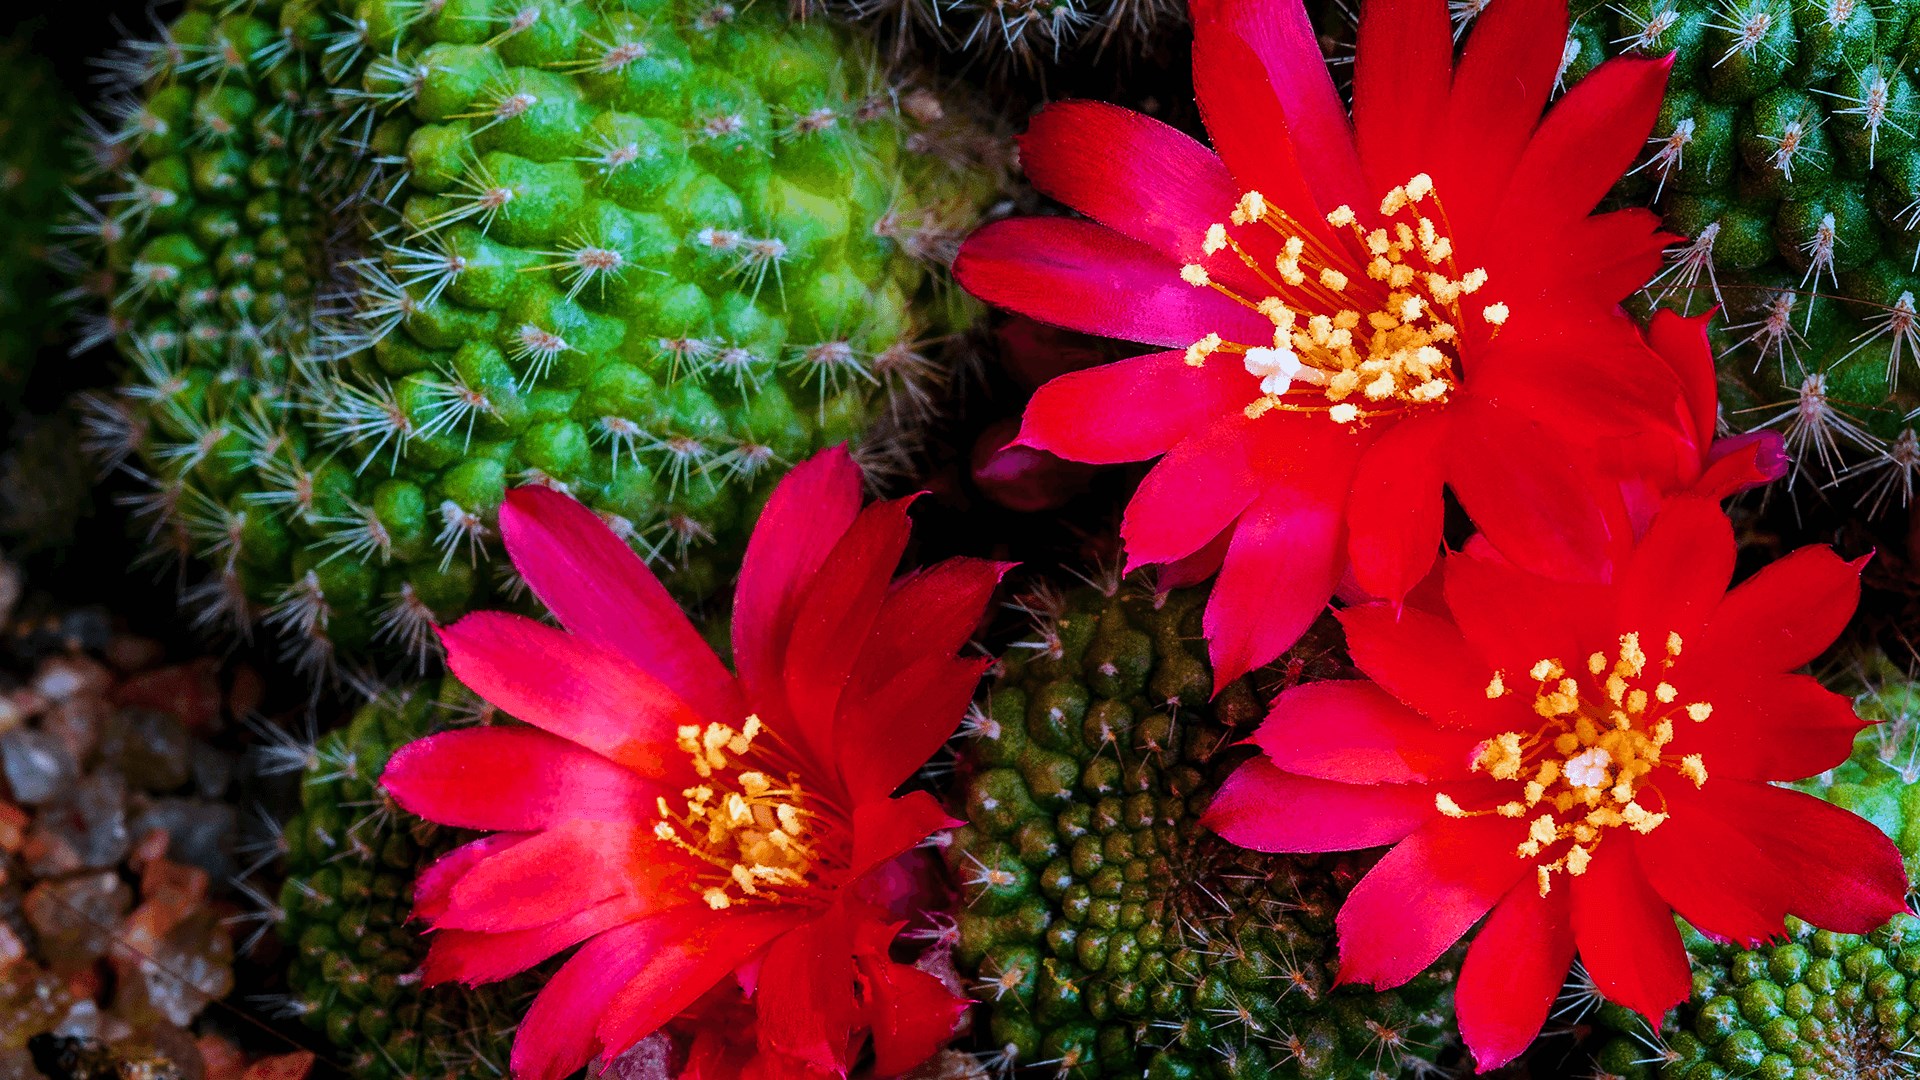 Download Windows 10 official 4K theme 'Cactus Flowers' is now available in Store